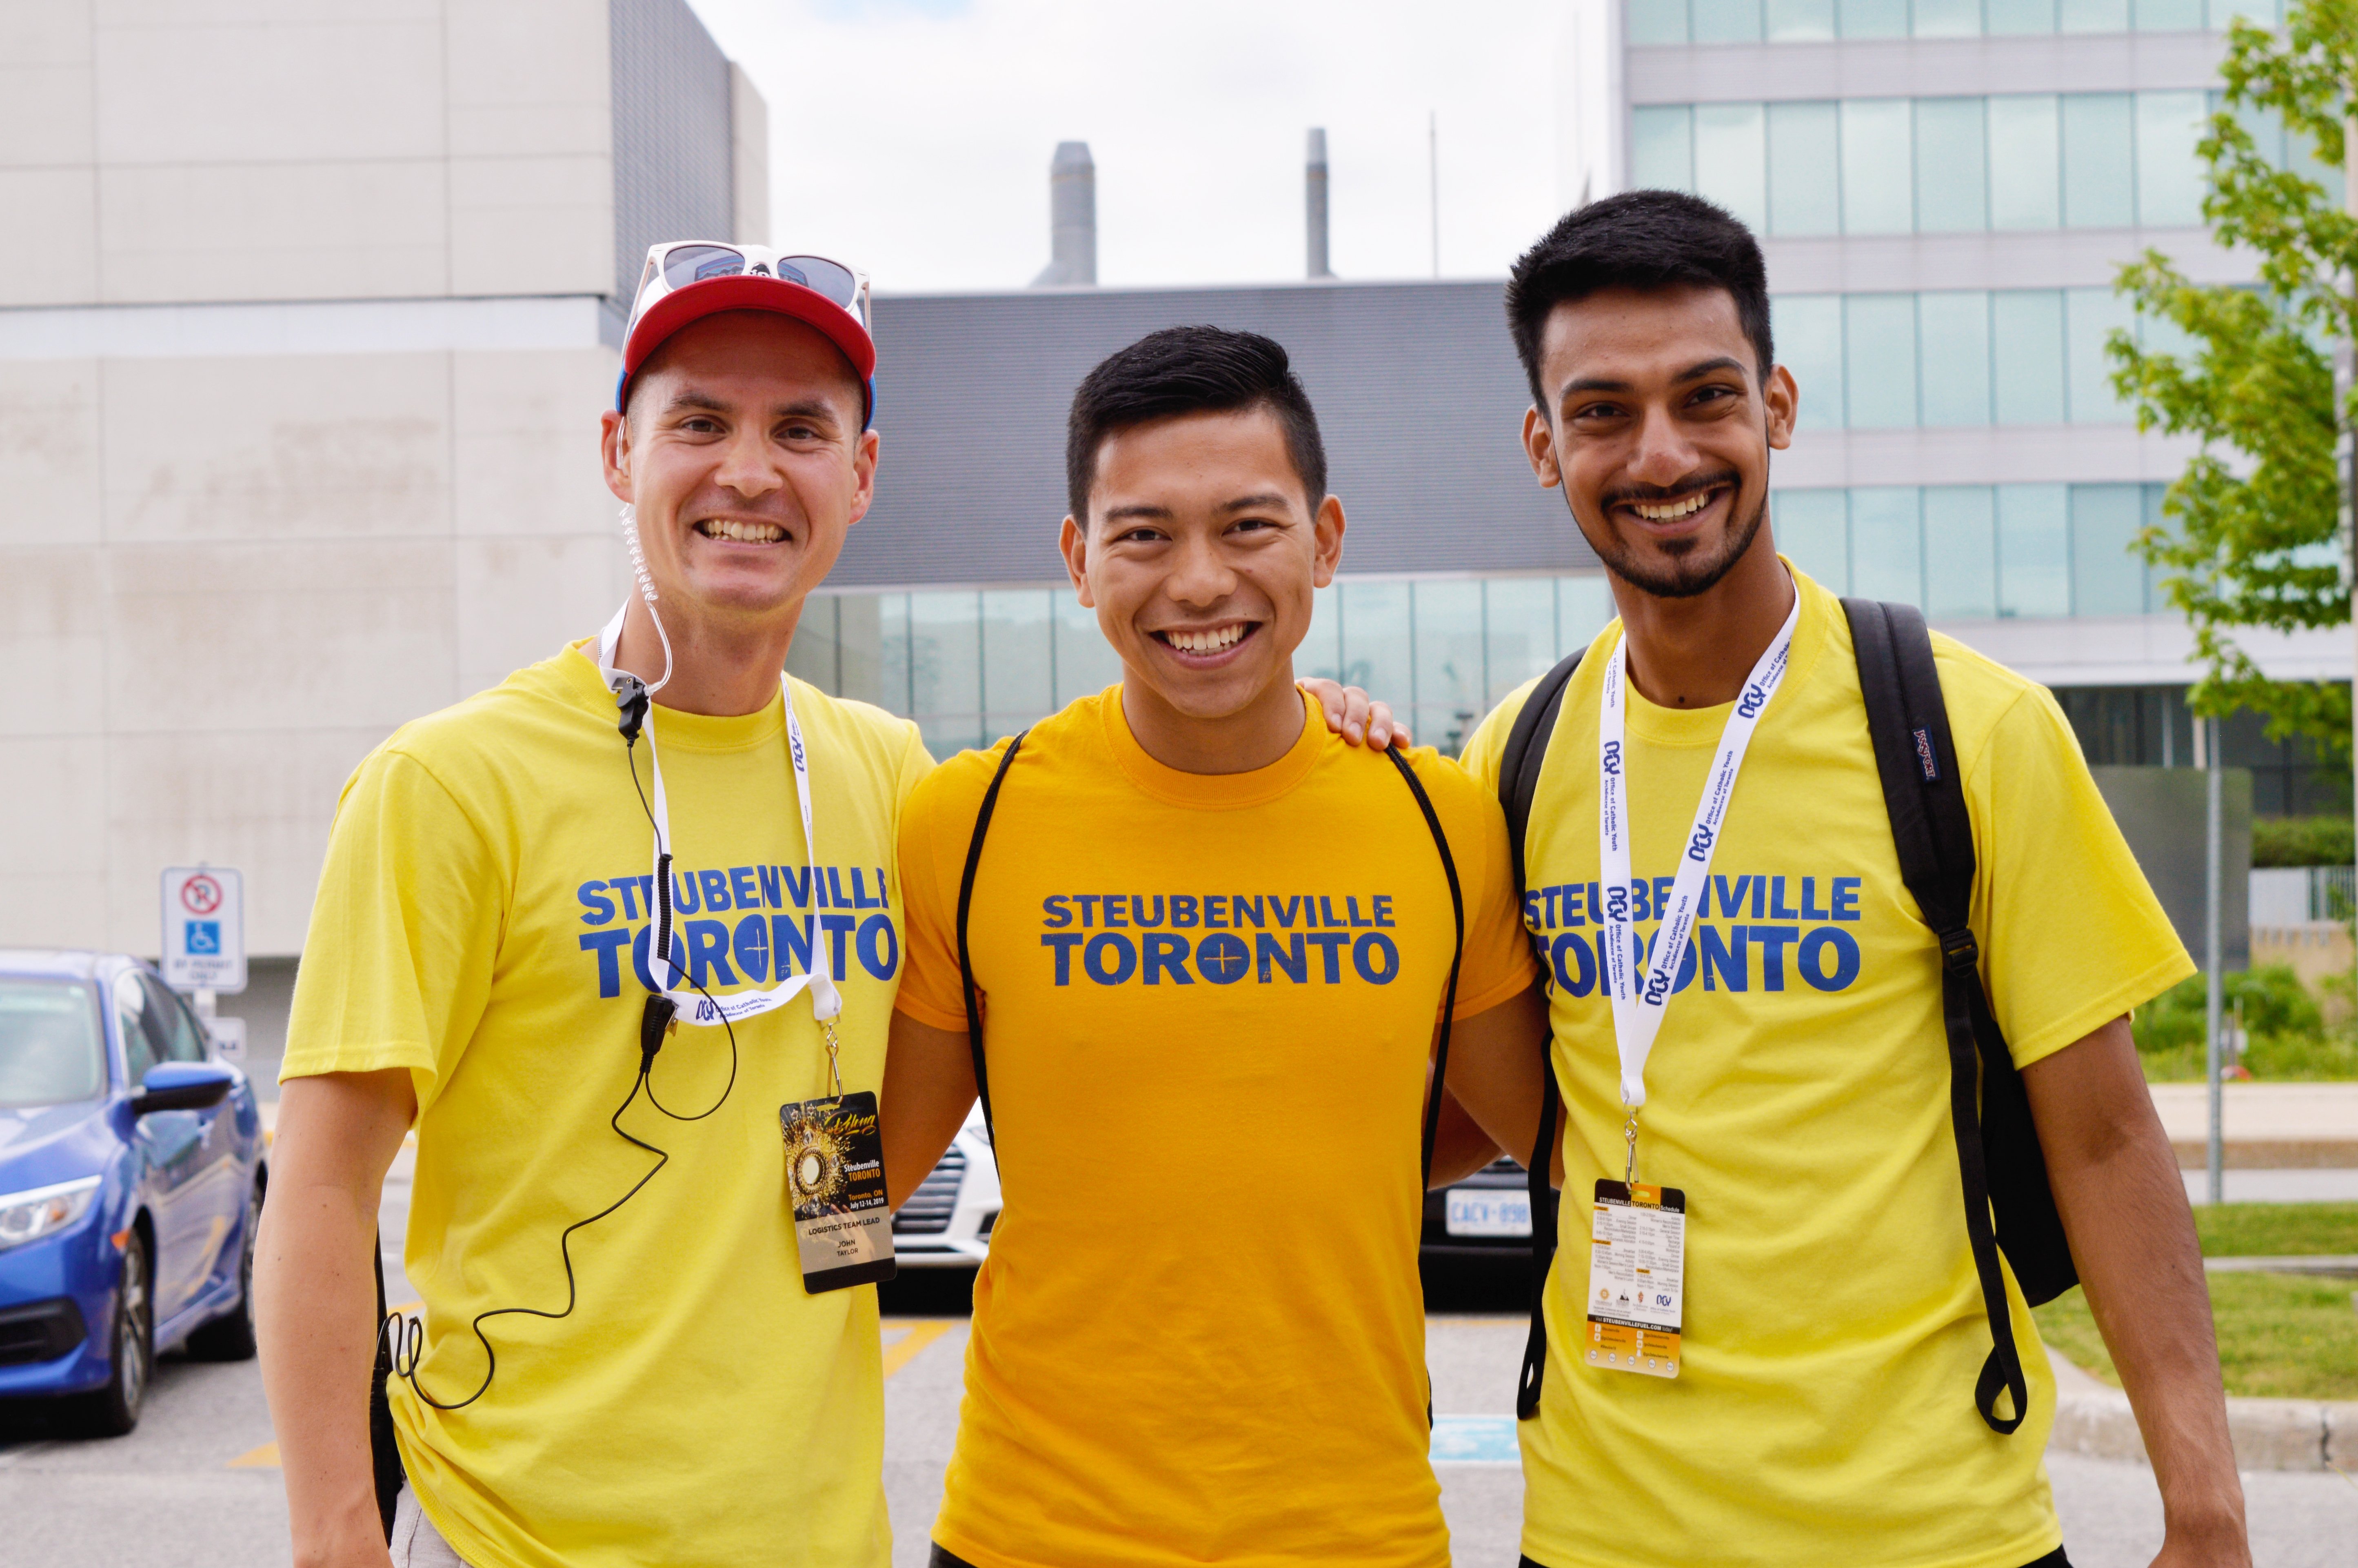 Three men of various ethnicities wearing yellow shirts and smiling together